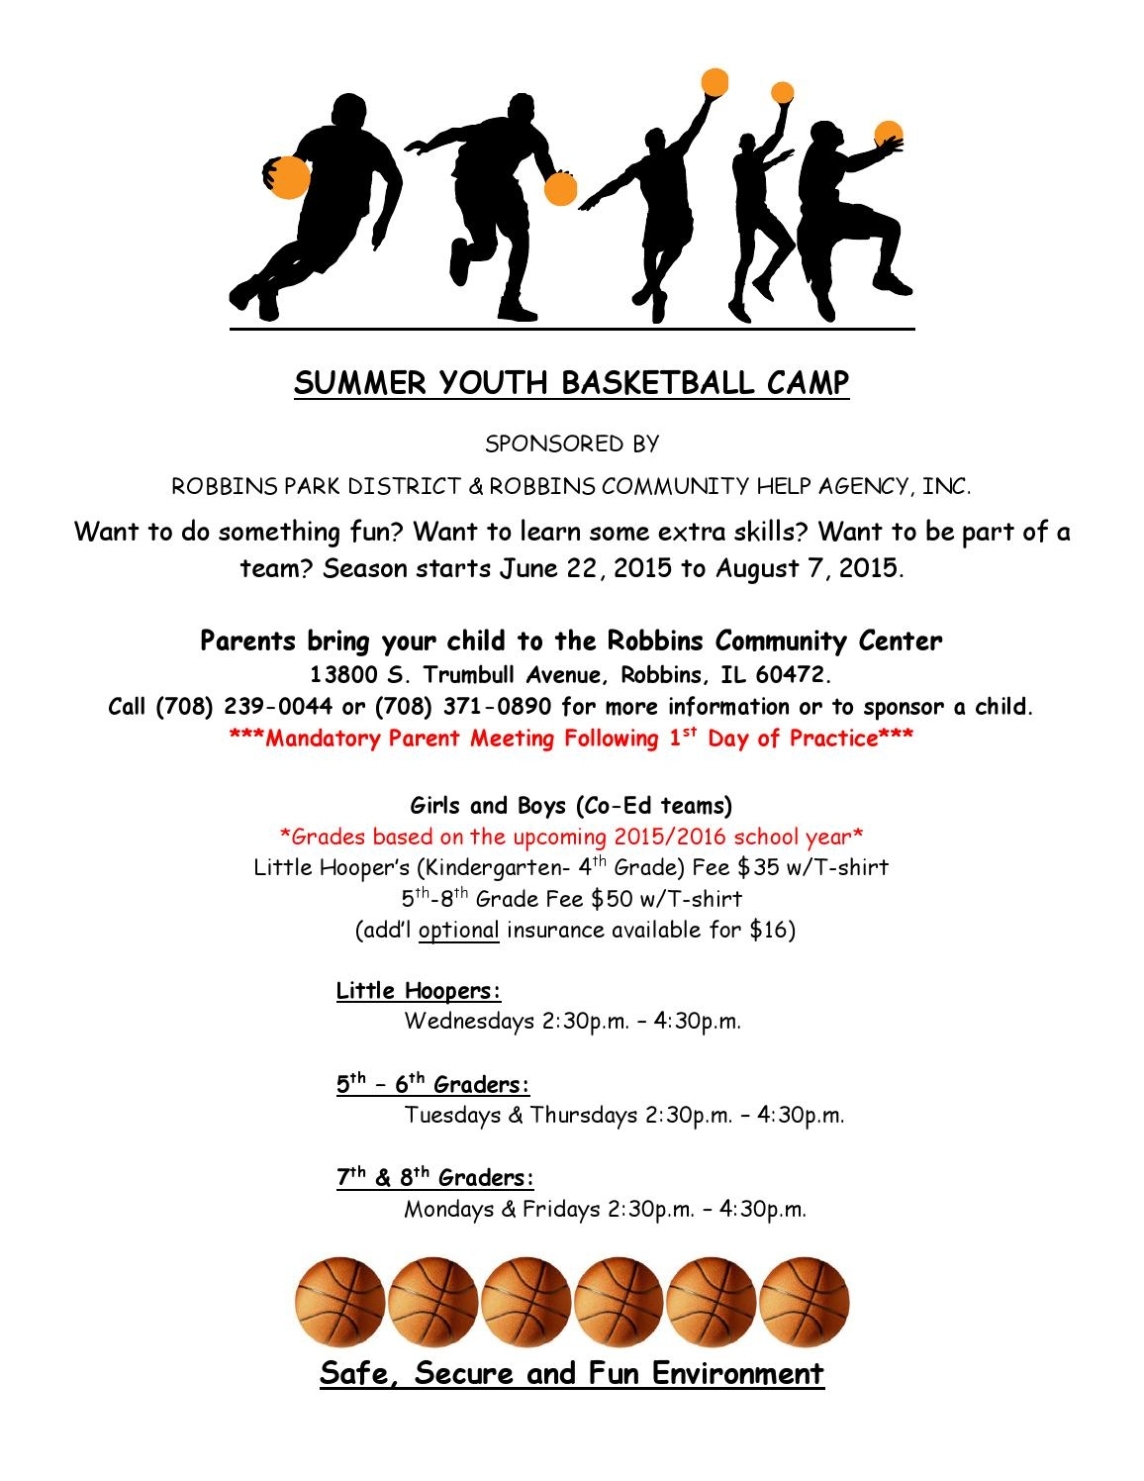 Summer Youth Basketball Camp Flyer By 644255 – Issuu Inside Sports Camp Flyer Template